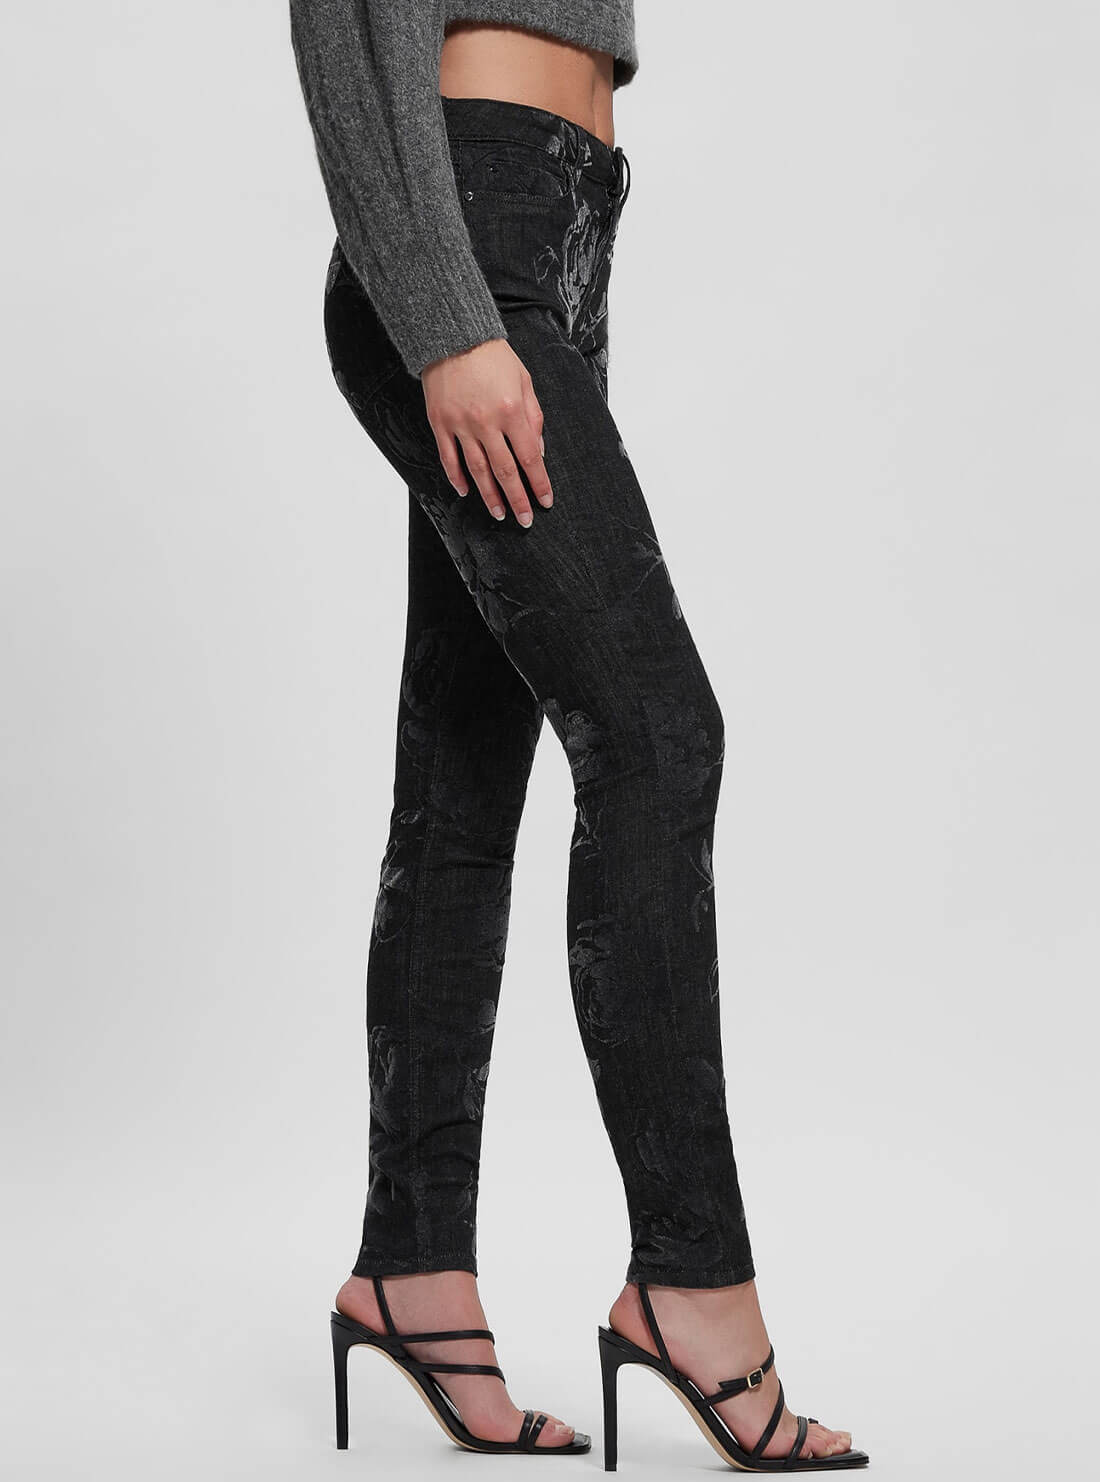 High-Rise 1981 Skinny Leg Denim Jeans In Armstrong Wash | GUESS Women's Apparel | side view